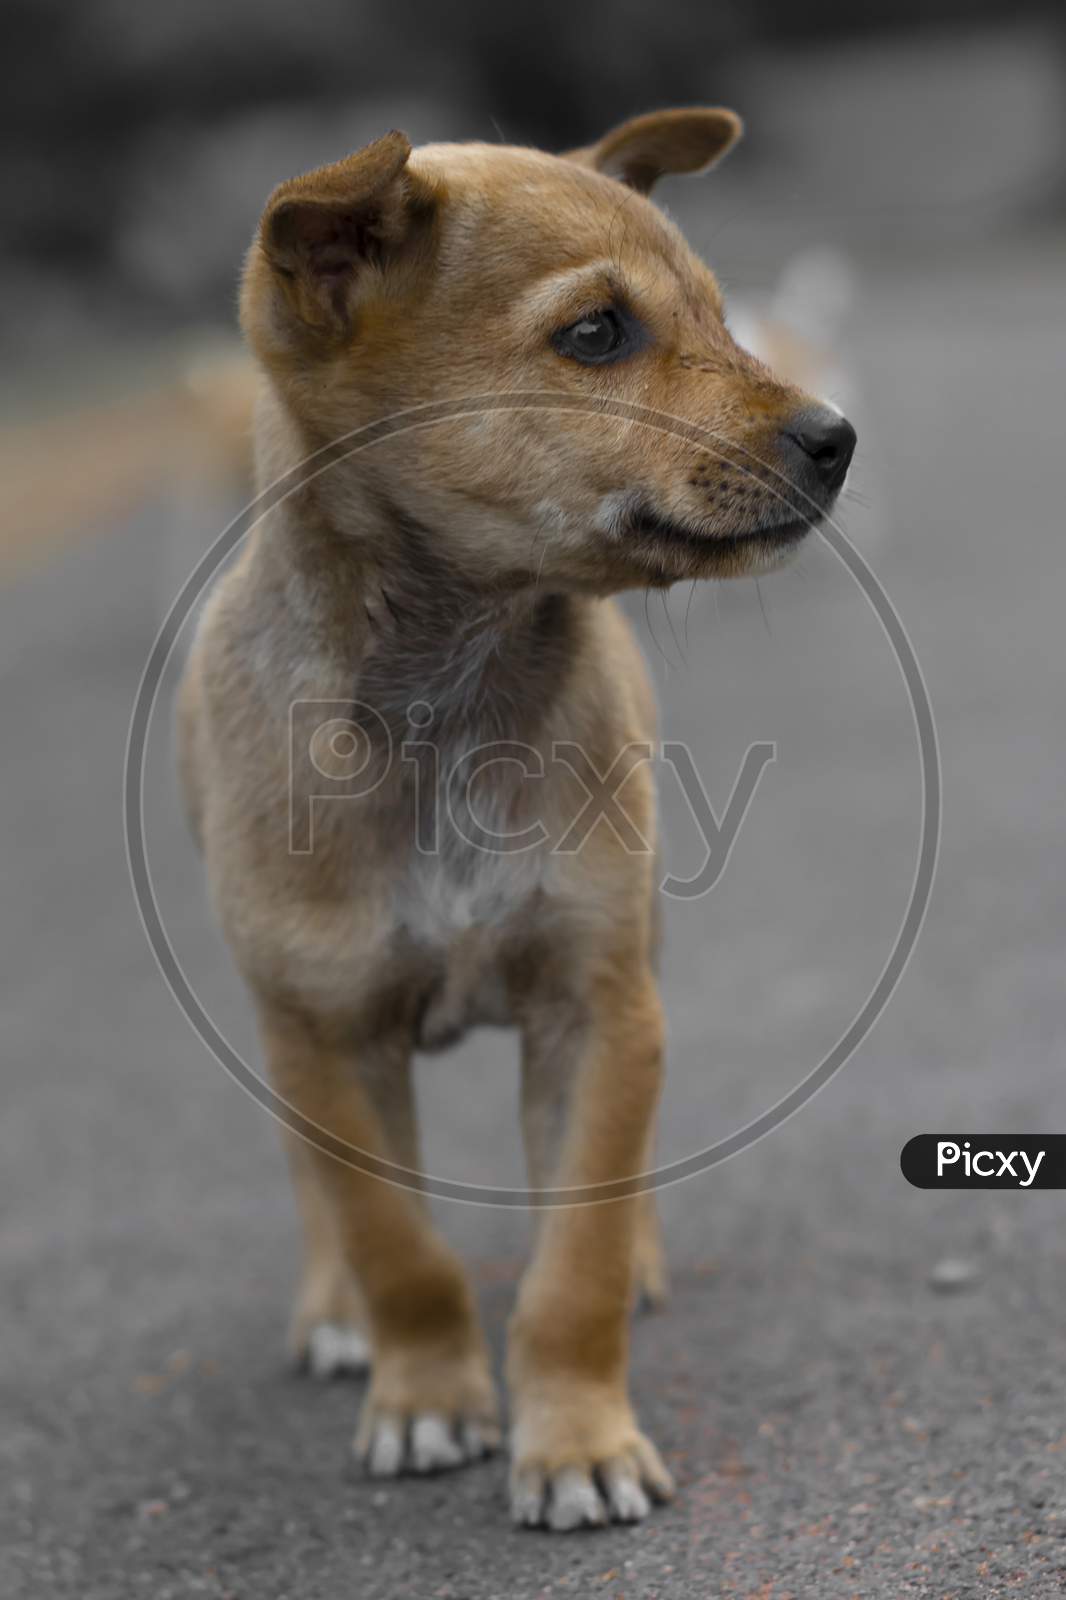 Street Puppy Brown Walking On Road Alone Looking Right